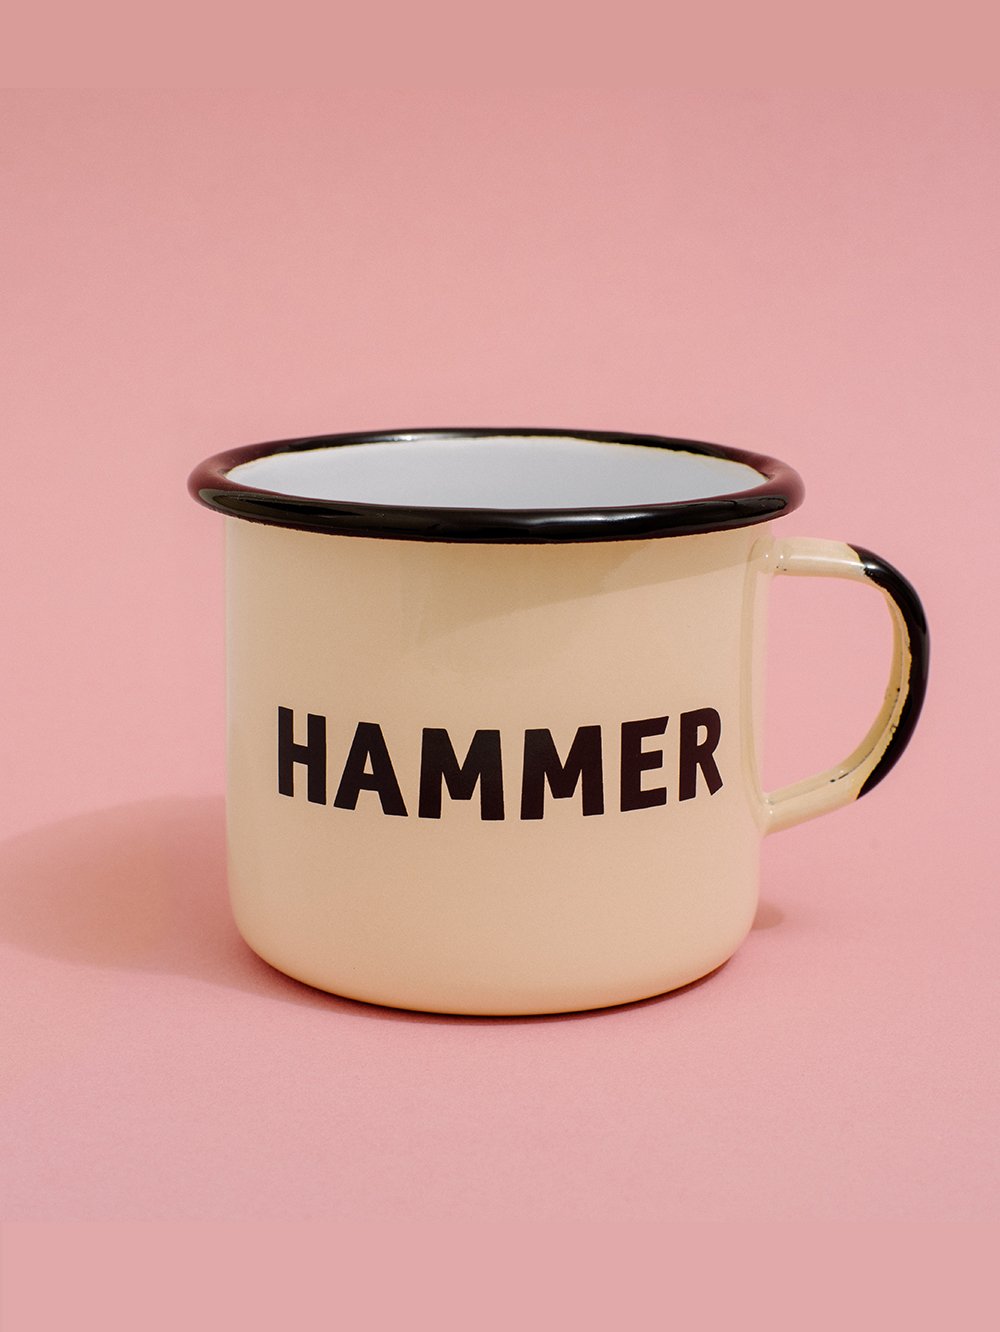 Cream colored mug with the text 'Hammer' on it. 